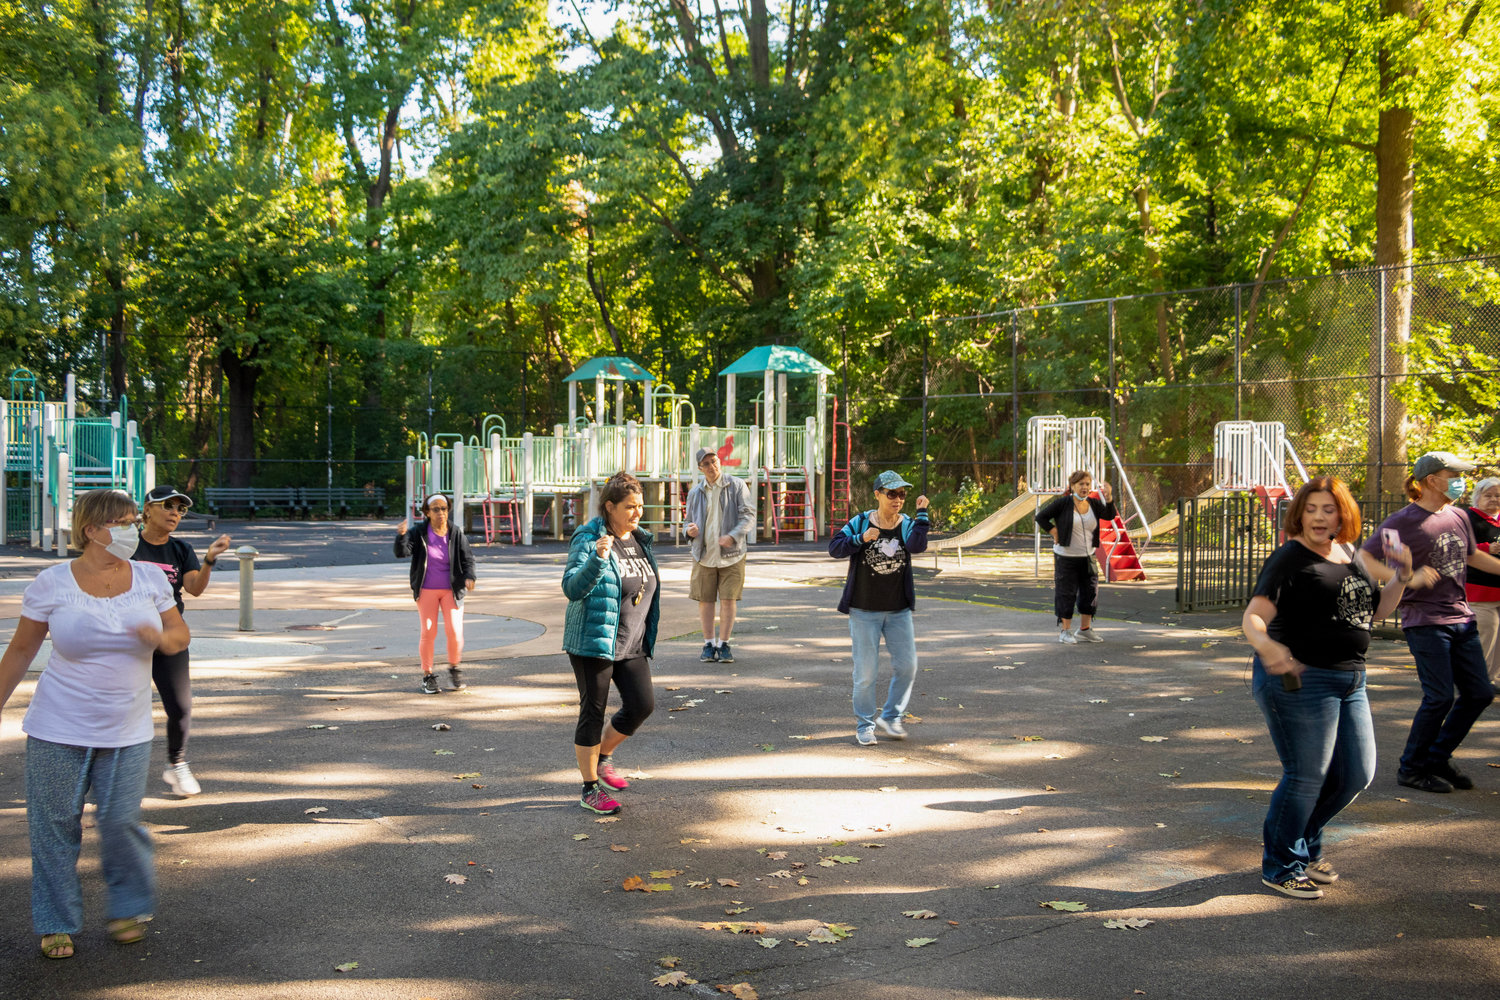 Daniela Del Giorno leads one of Silver Shoes Dance Club’s free classes at Van Cortlandt Park’s Classic Playground, across the street from the Amalgamated Houses. Del Girono founded Silver Shoes to help those over 55 to stay physically healthy and mentally sharp as they age.